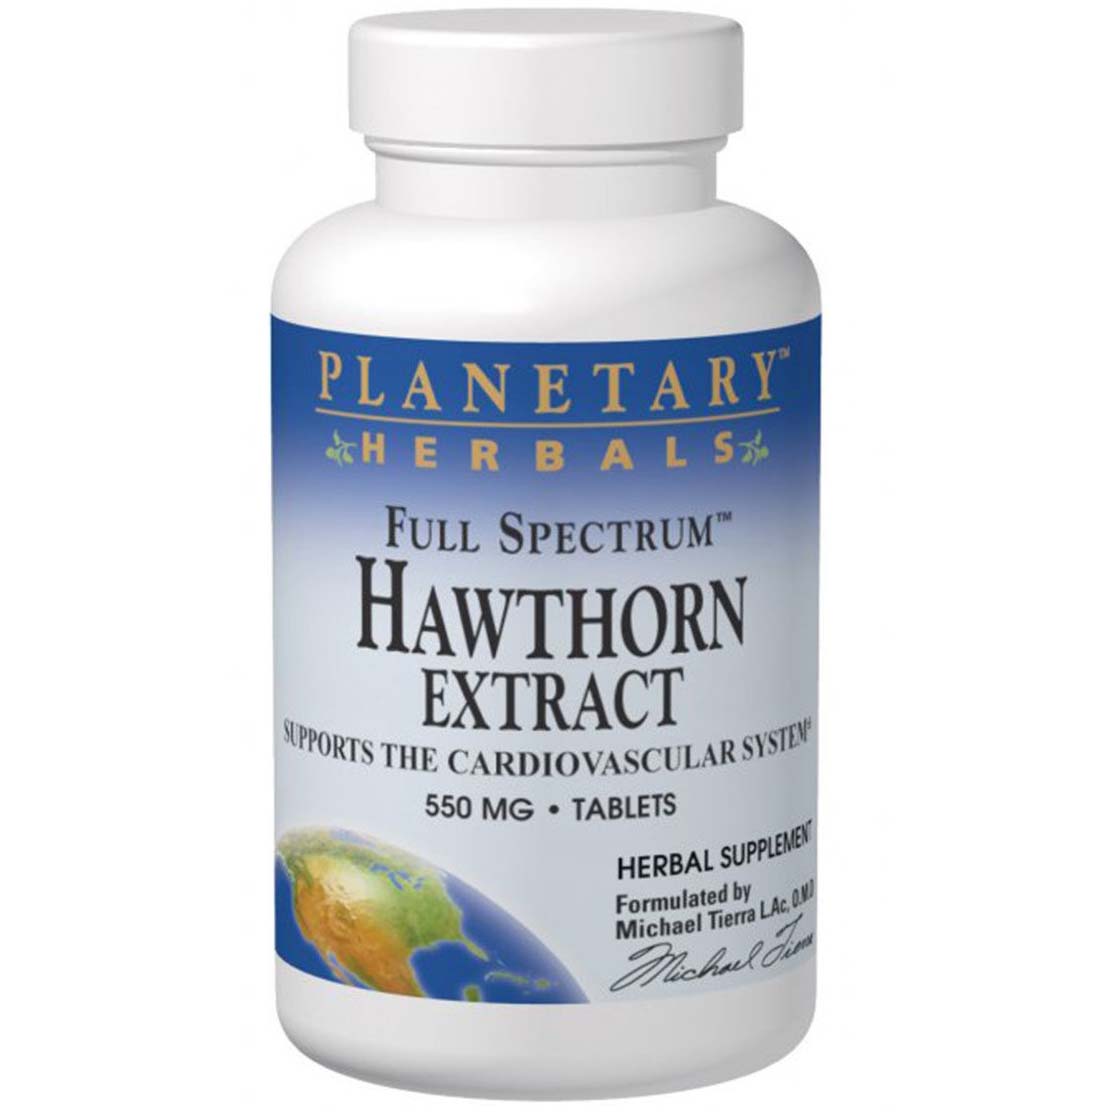 Planetary Herbals Hawthorn Extract Full Spectrum 60 Tablets 550 mg